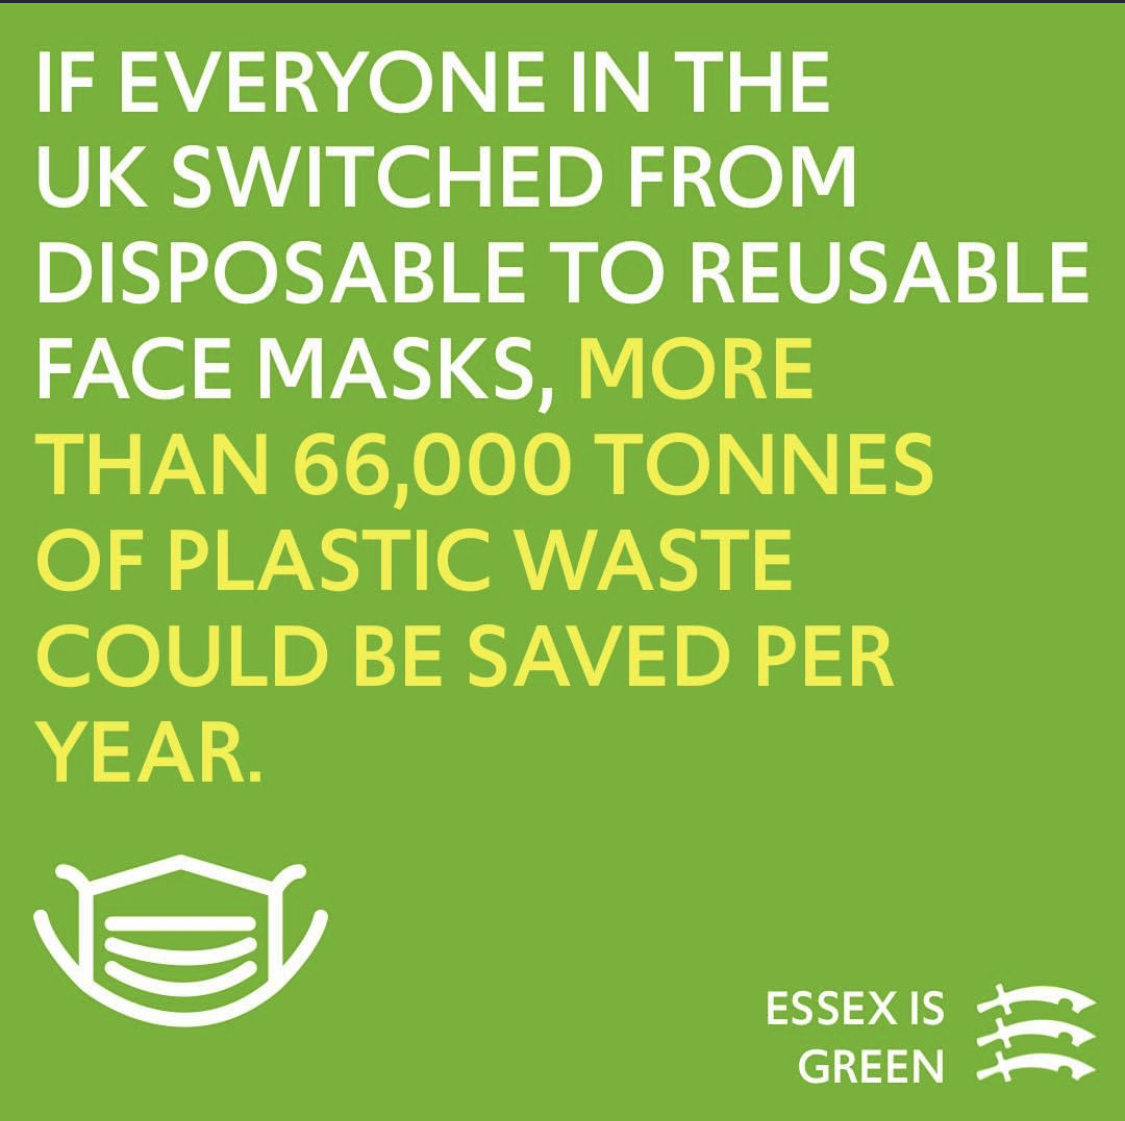 I’ll just leave this here.....

savilerow-masks.com/shop.html #sustainability #sustainable #reusablefacemasks #reusablefacemask #reusablemask #sustainability #sustainable #comfortablefacemask #comfortablemask #breathablefacemask #breathablemask #masksforsale